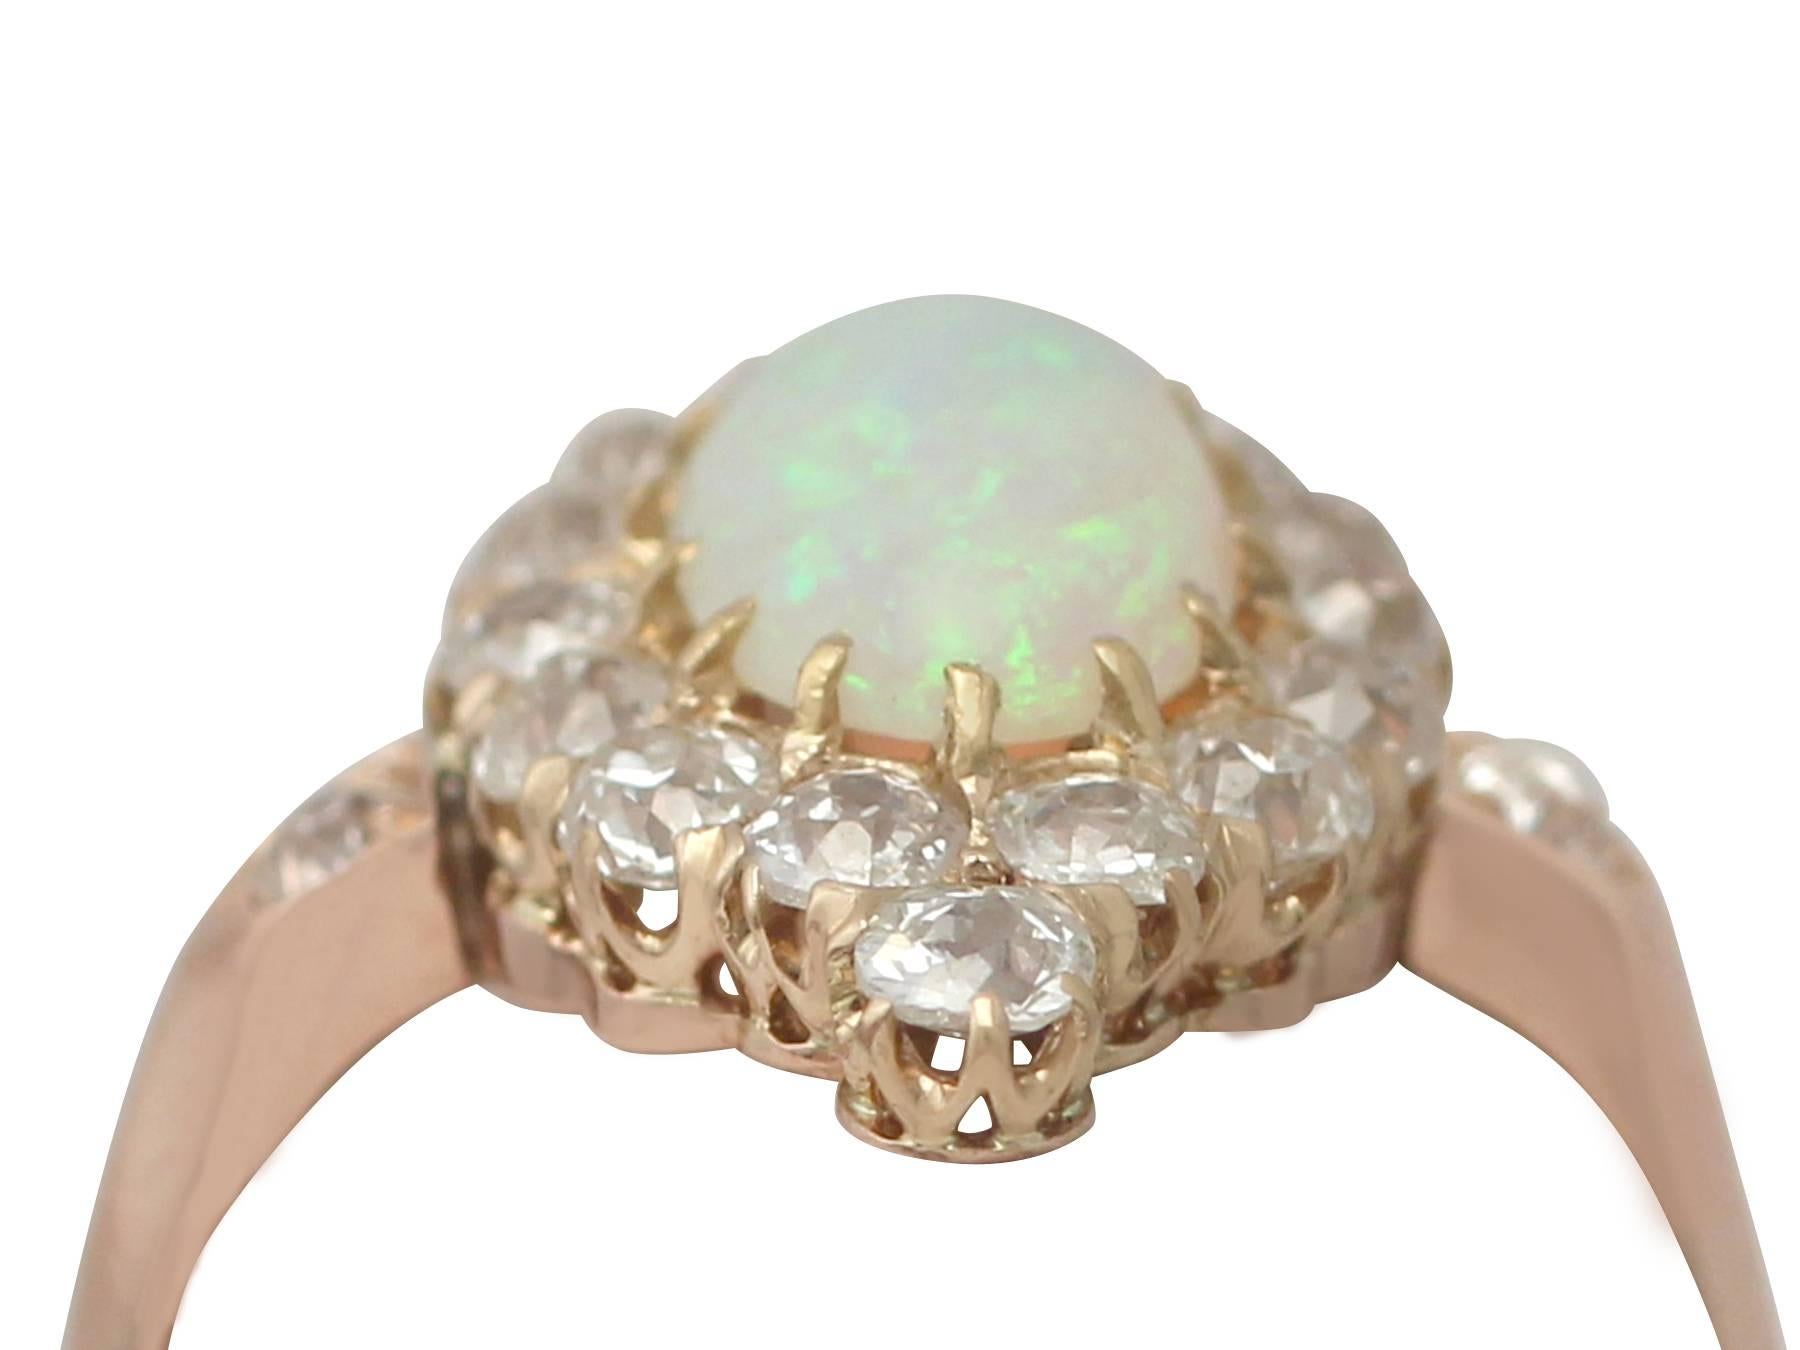 A stunning, fine and impressive antique French 1.06 carat opal and 0.48 carat diamond, 14 karat yellow gold dress ring; an addition to our antique jewellery and estate jewelry collections

This stunning, fine and impressive opal and diamond dress